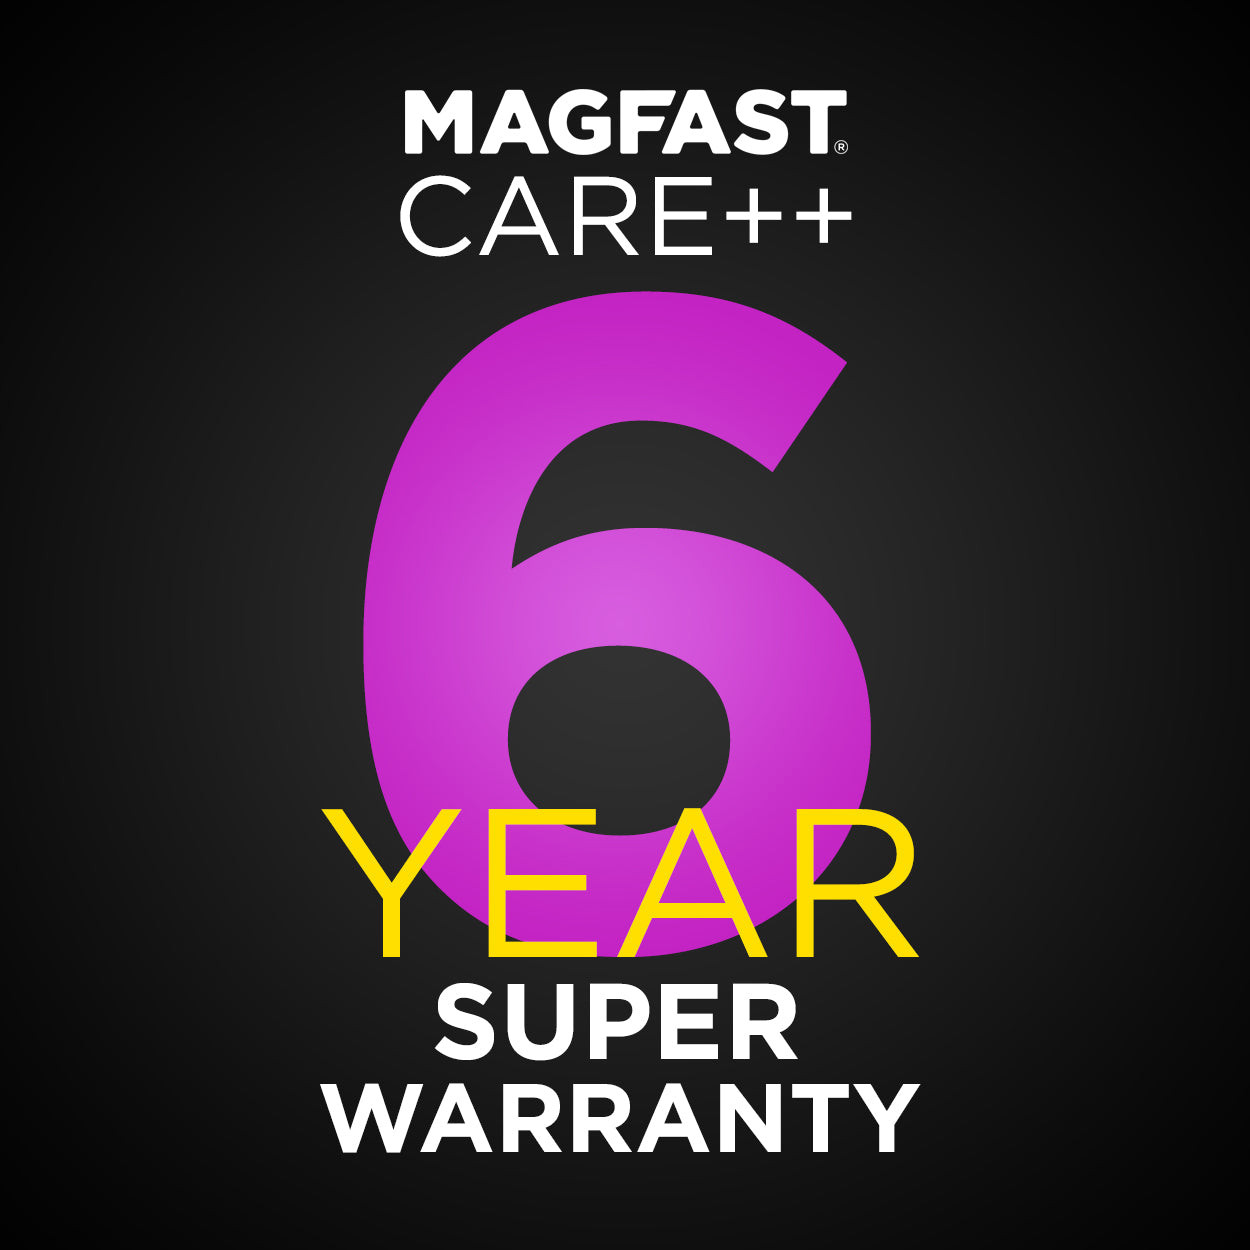 MAGFAST Care++ 6 Year Extended Warranty